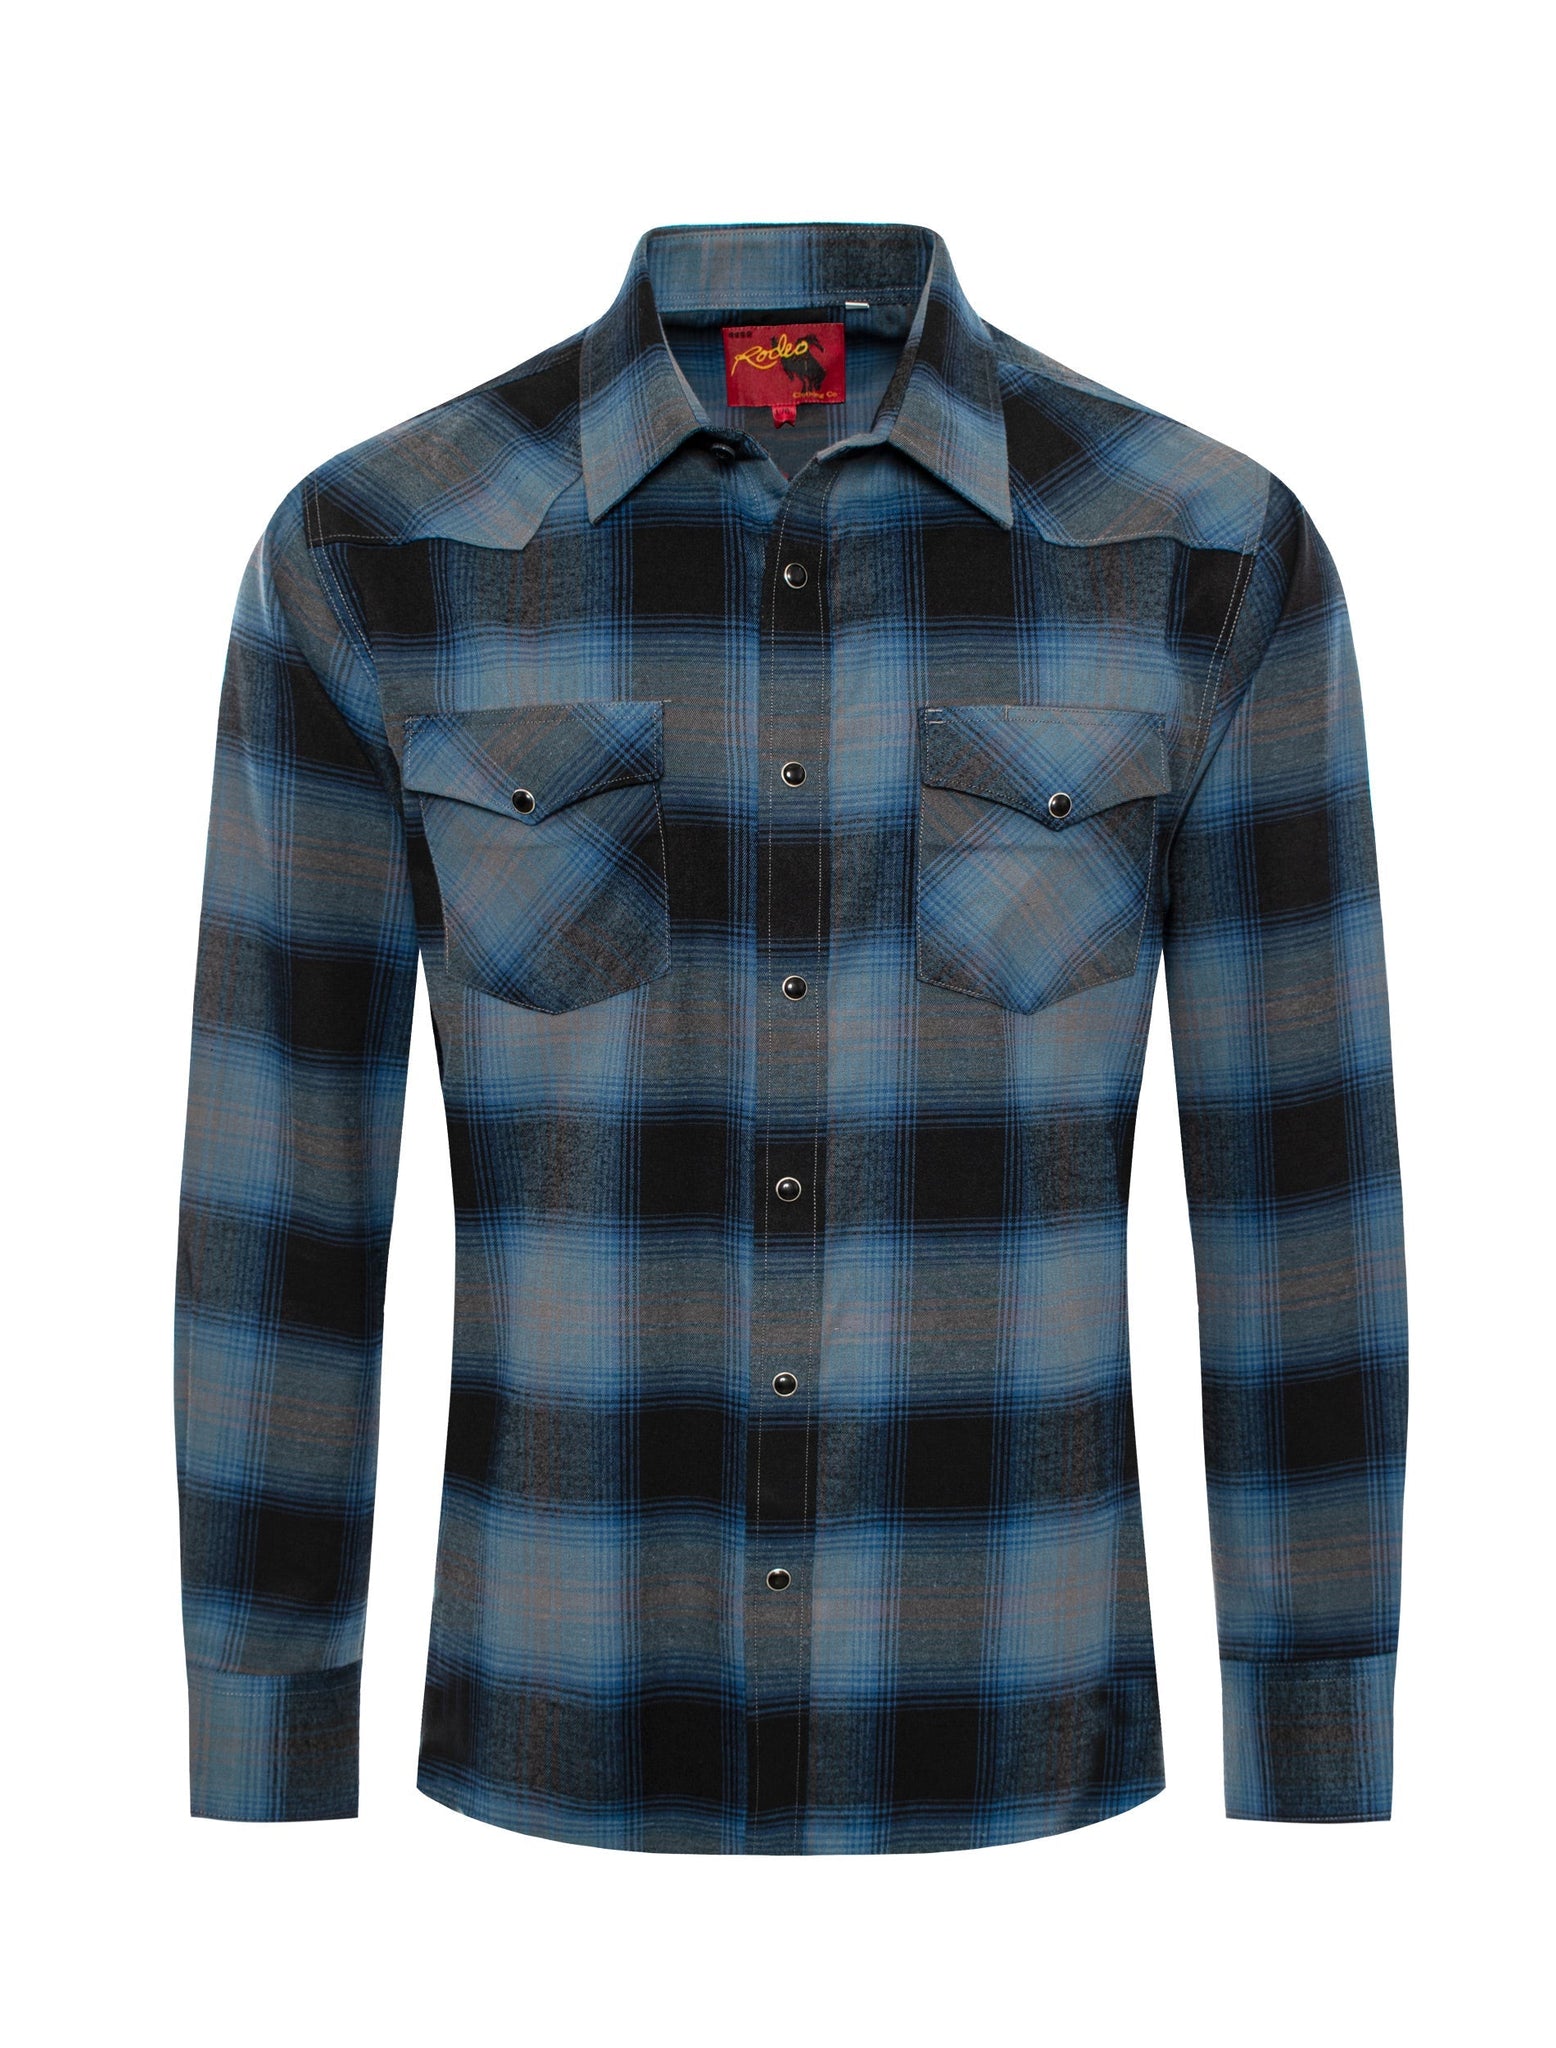 Men's Western Flannel Shirts With Snap Buttons -FLS300-303